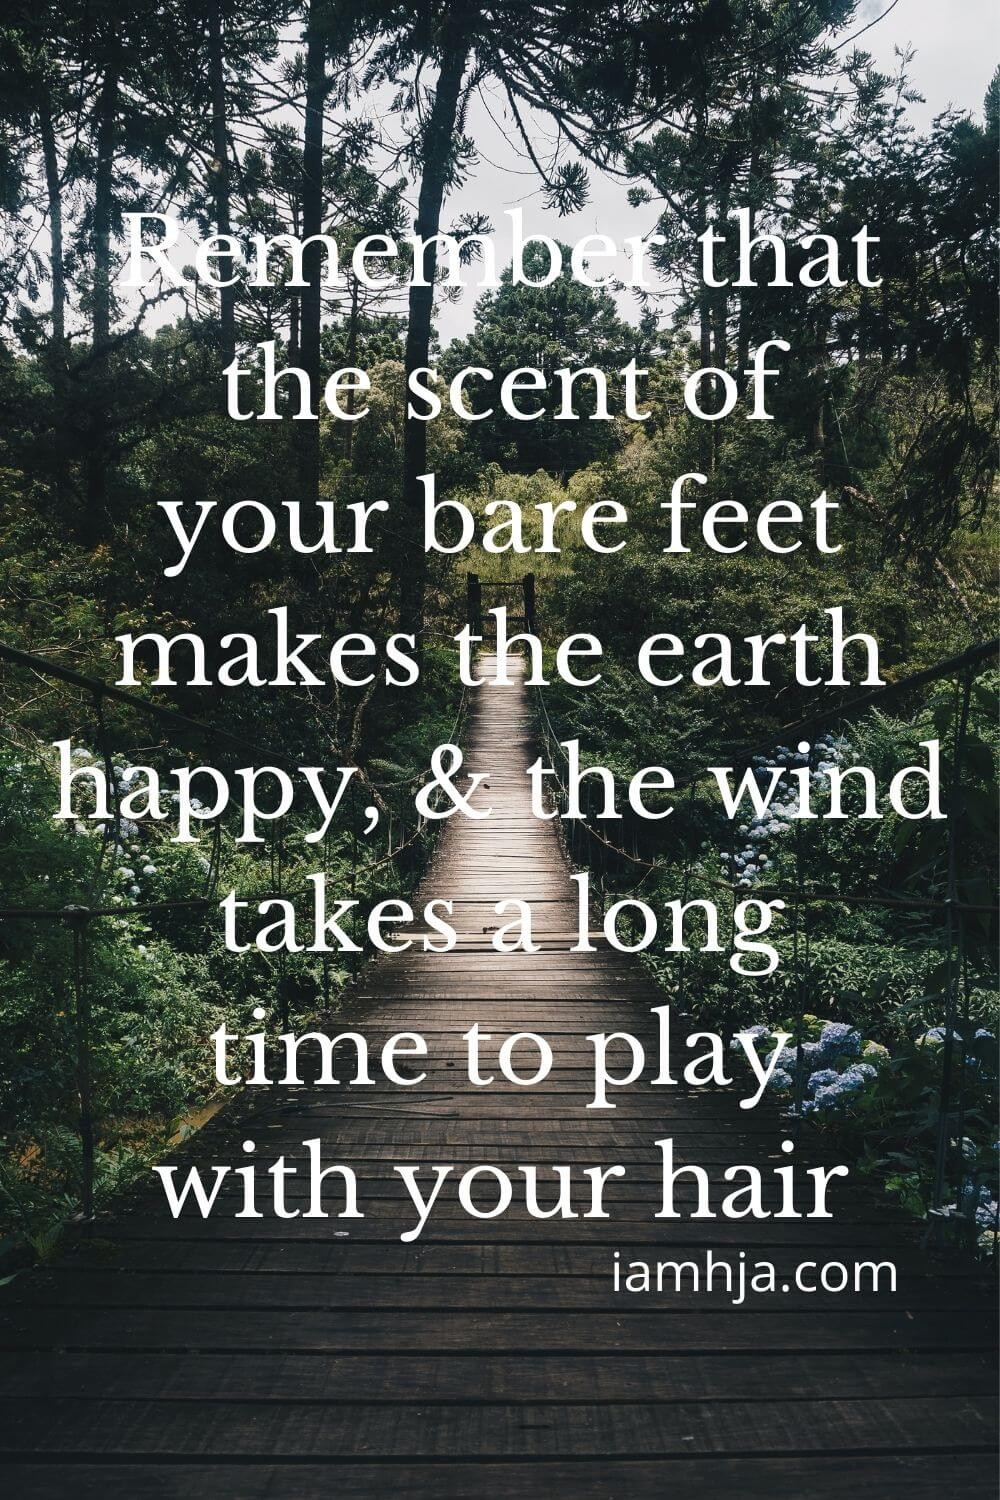 Remember that the scent of your bare feet makes the earth happy, and the wind takes a long time to play with your hair.